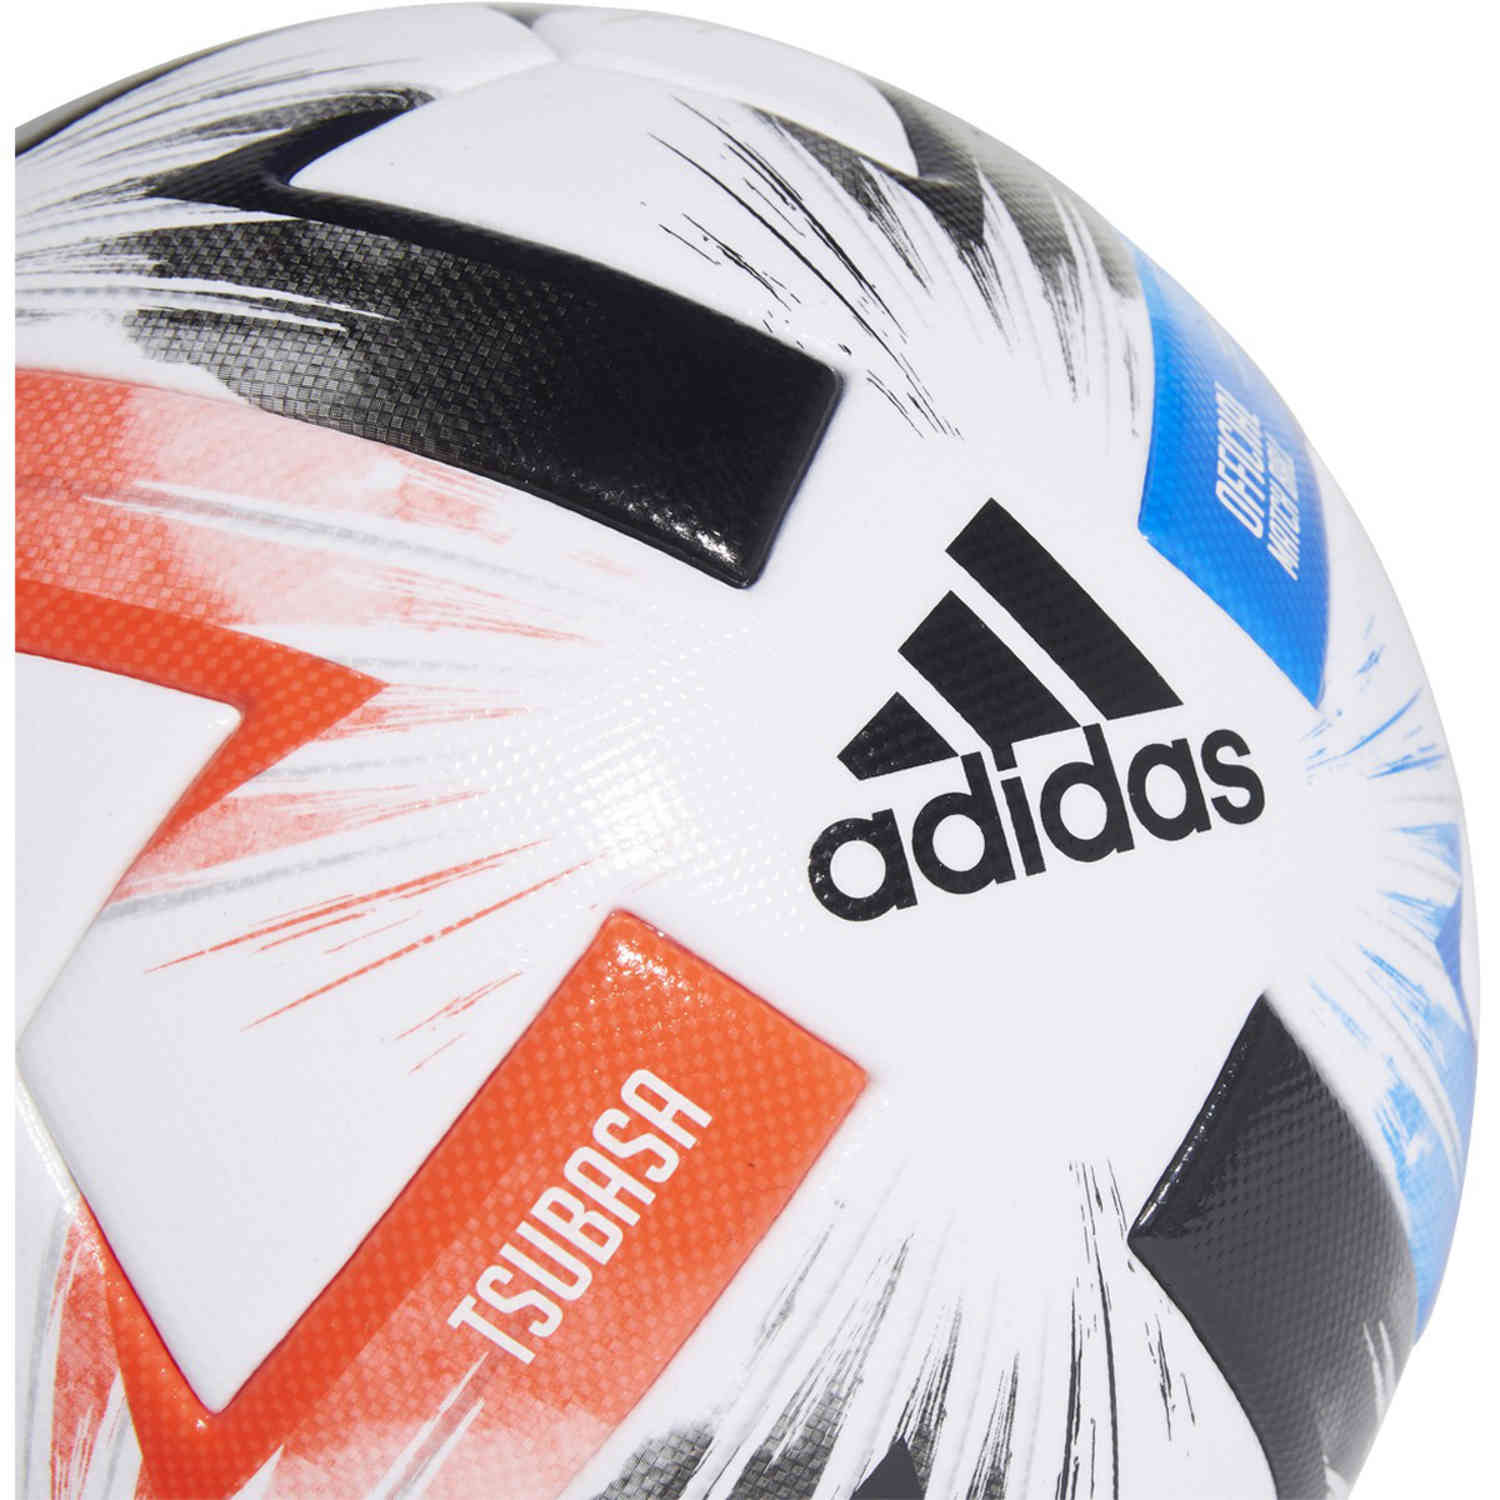 wedding home delivery Republic adidas Tsubasa Pro Official Match Soccer Ball - White & Solar Red with  Glory Blue with Black - Soccer Master